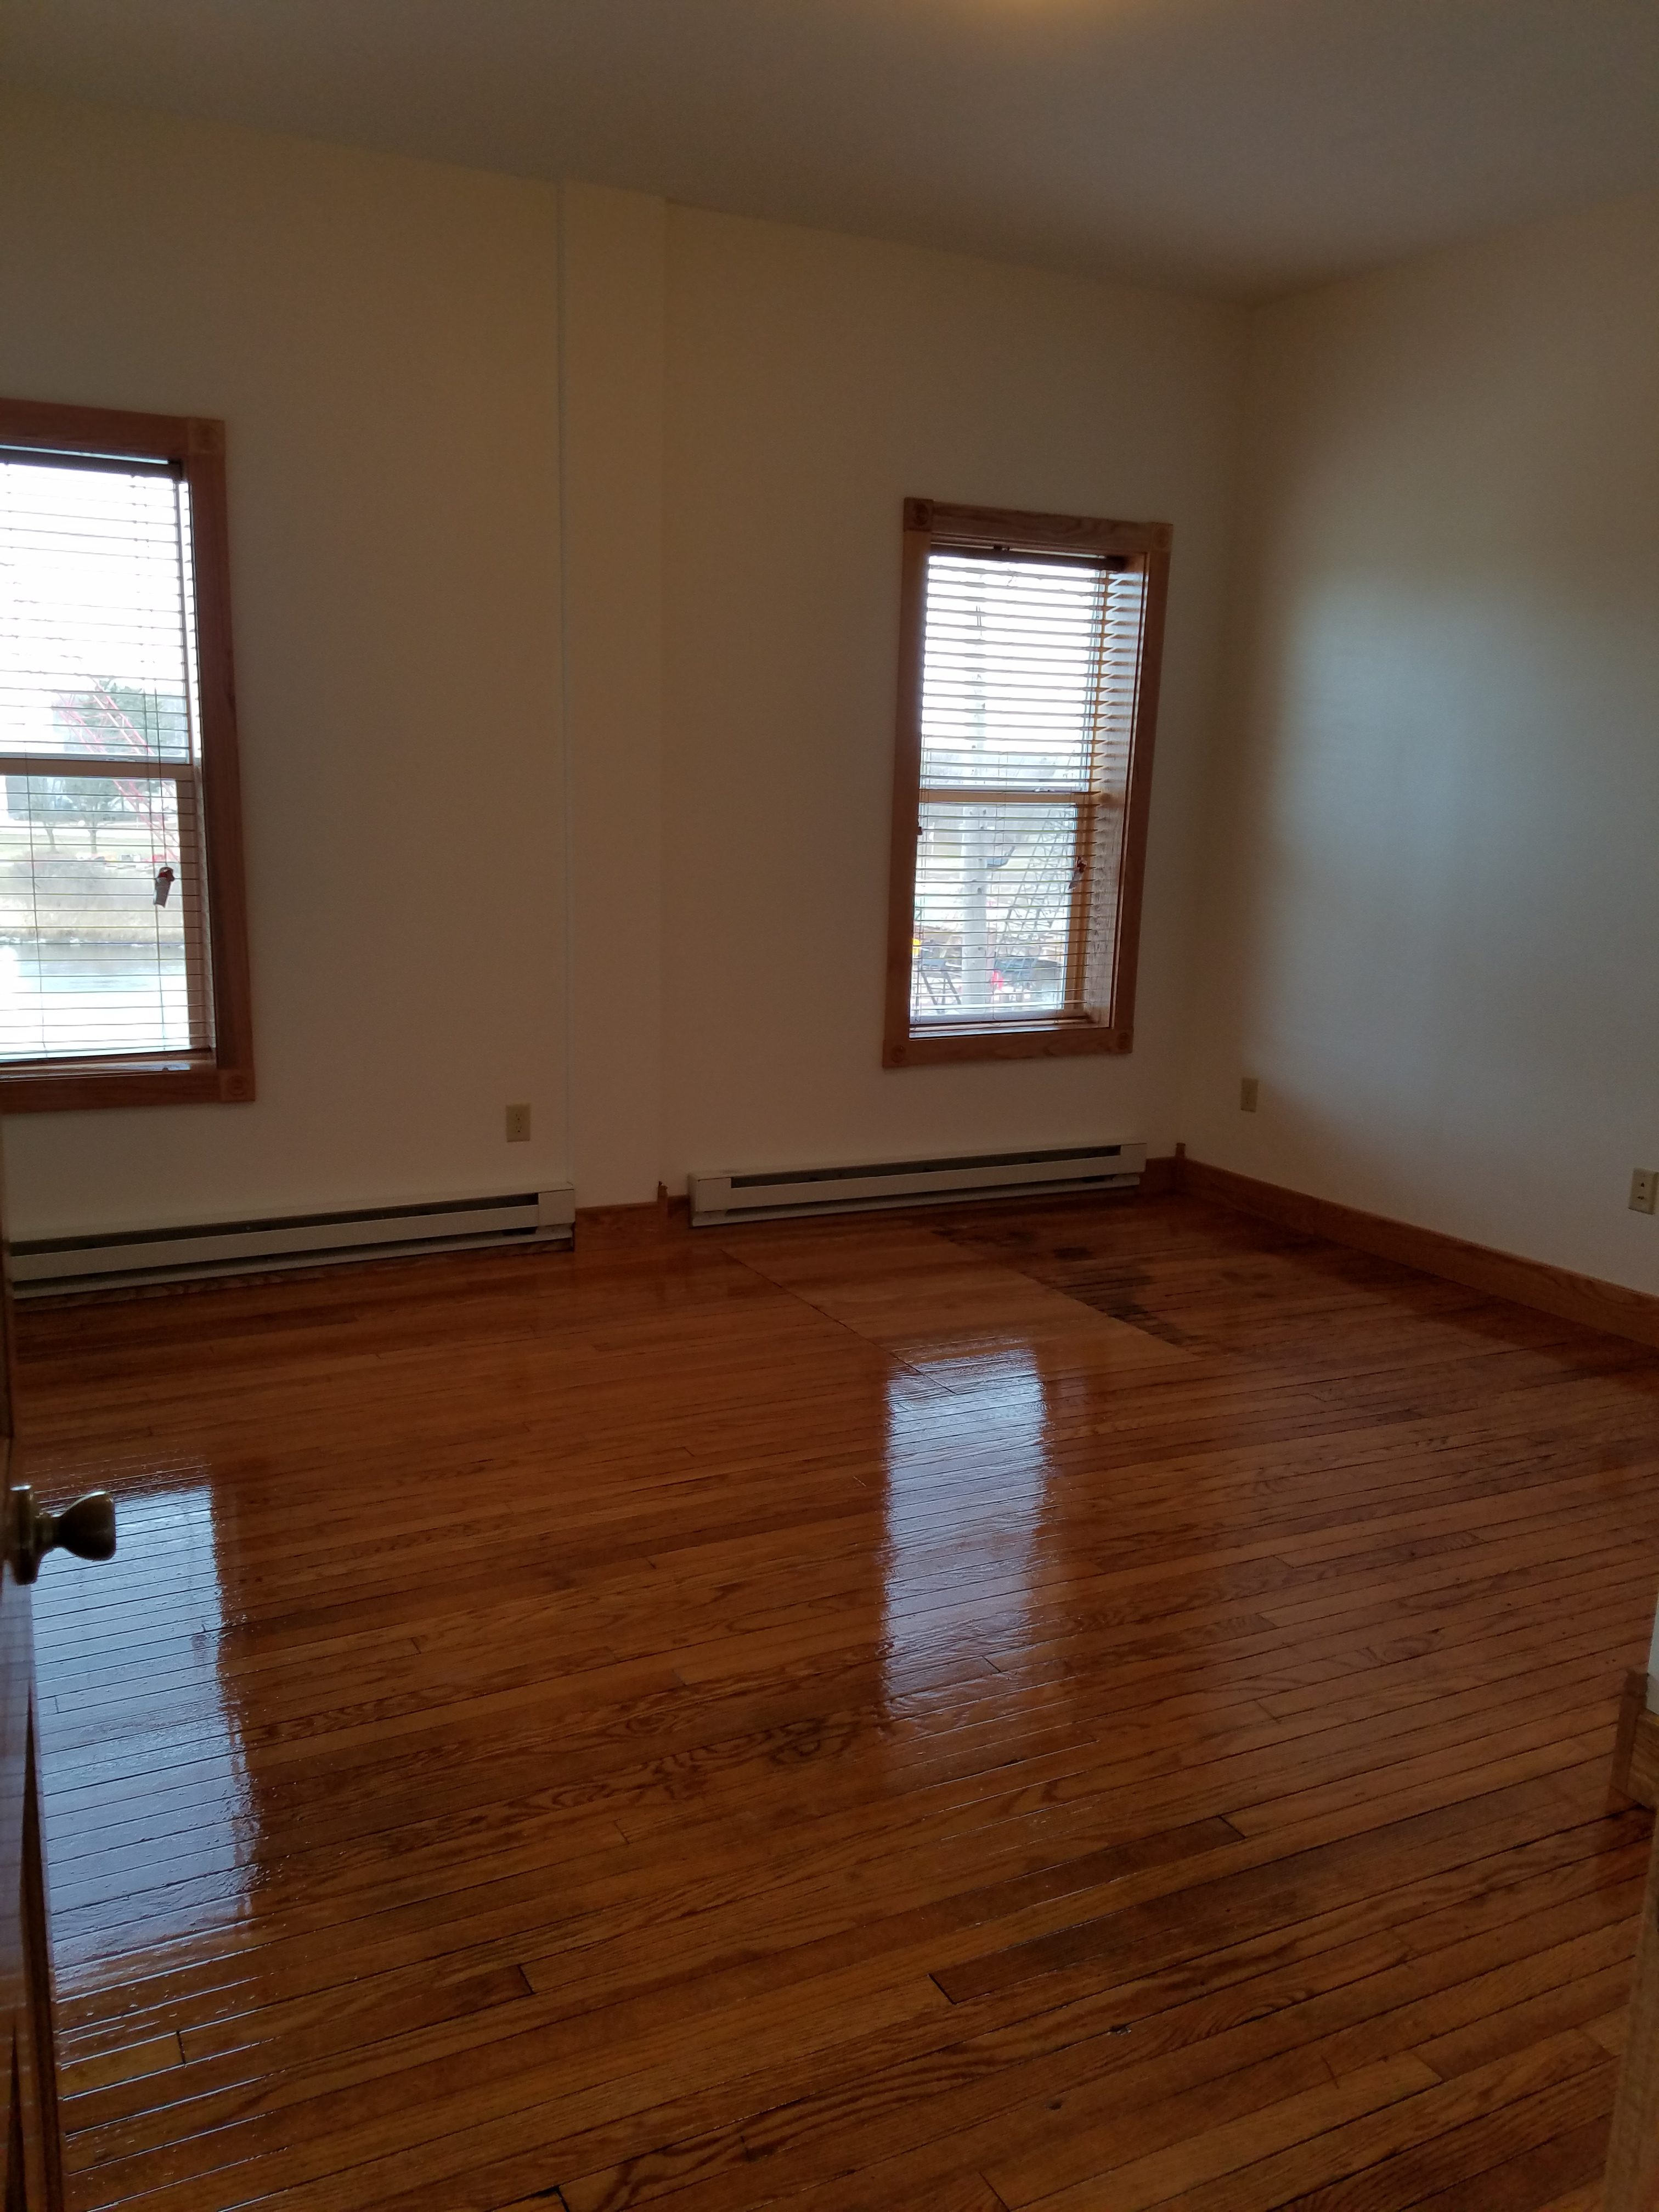 Terrace Arms 804 North Dubuque Street ASI Rentals Property